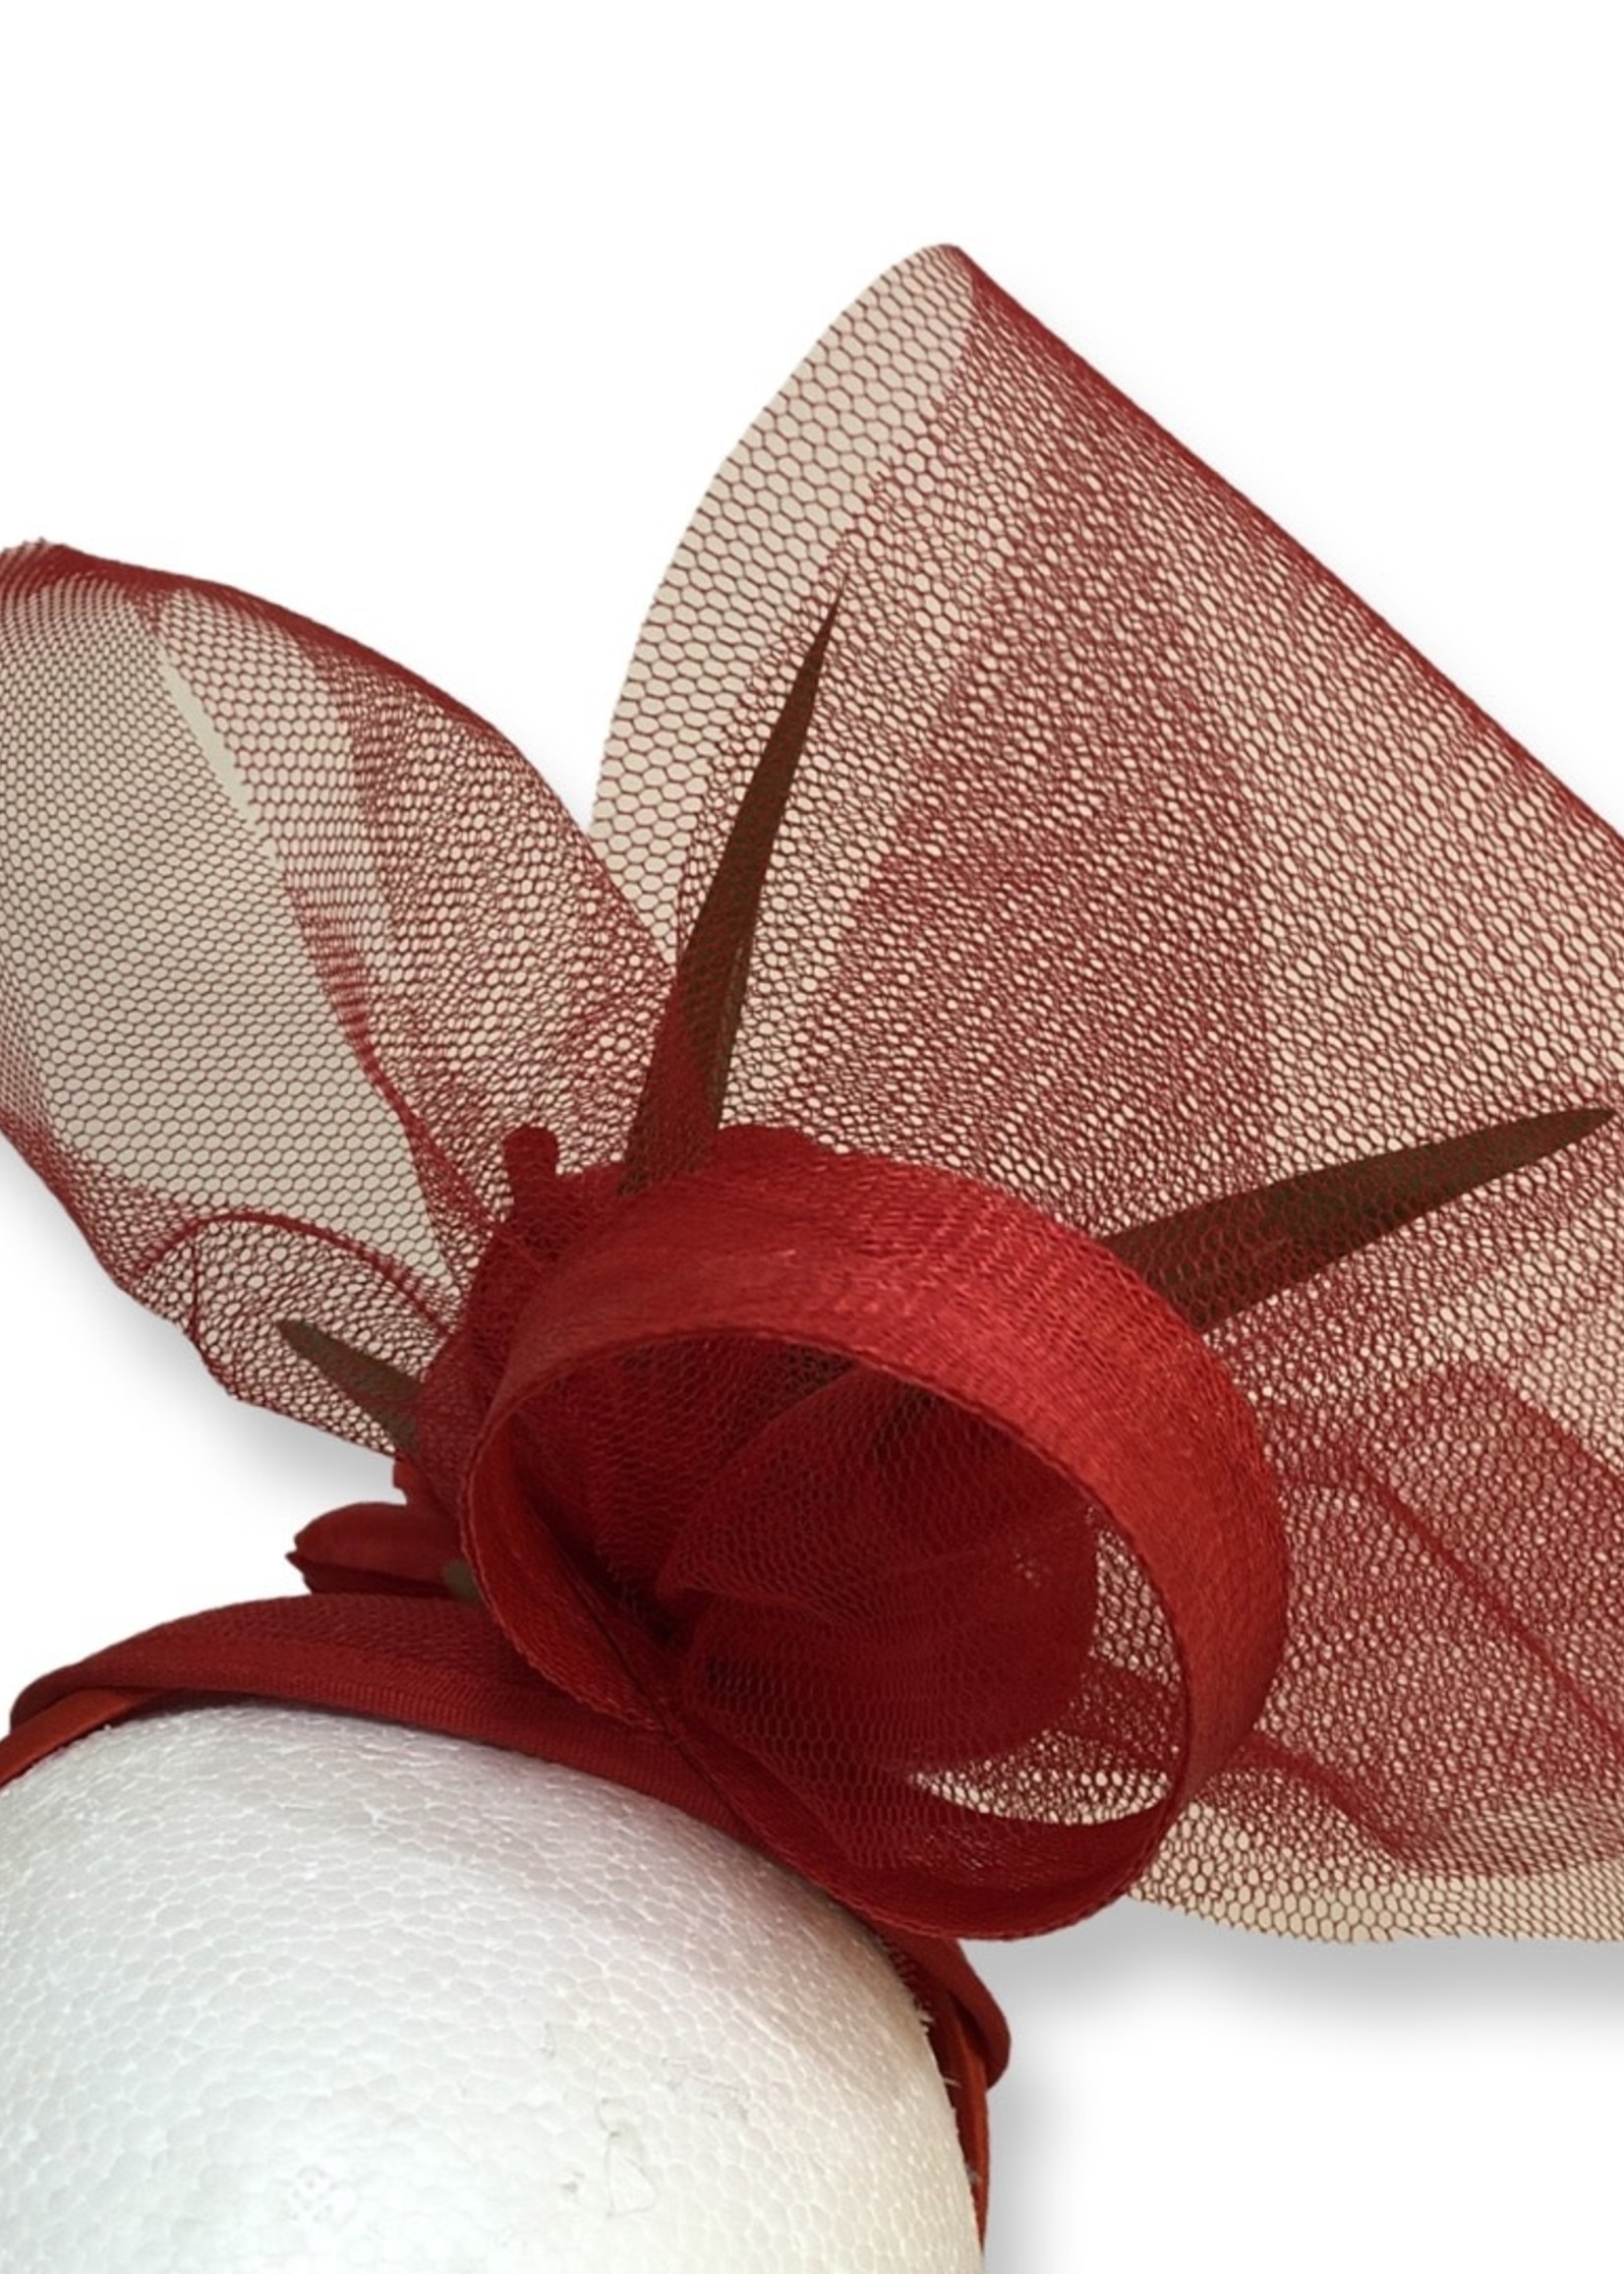 One Plus One Fashion Red Floral Headband Fascinator